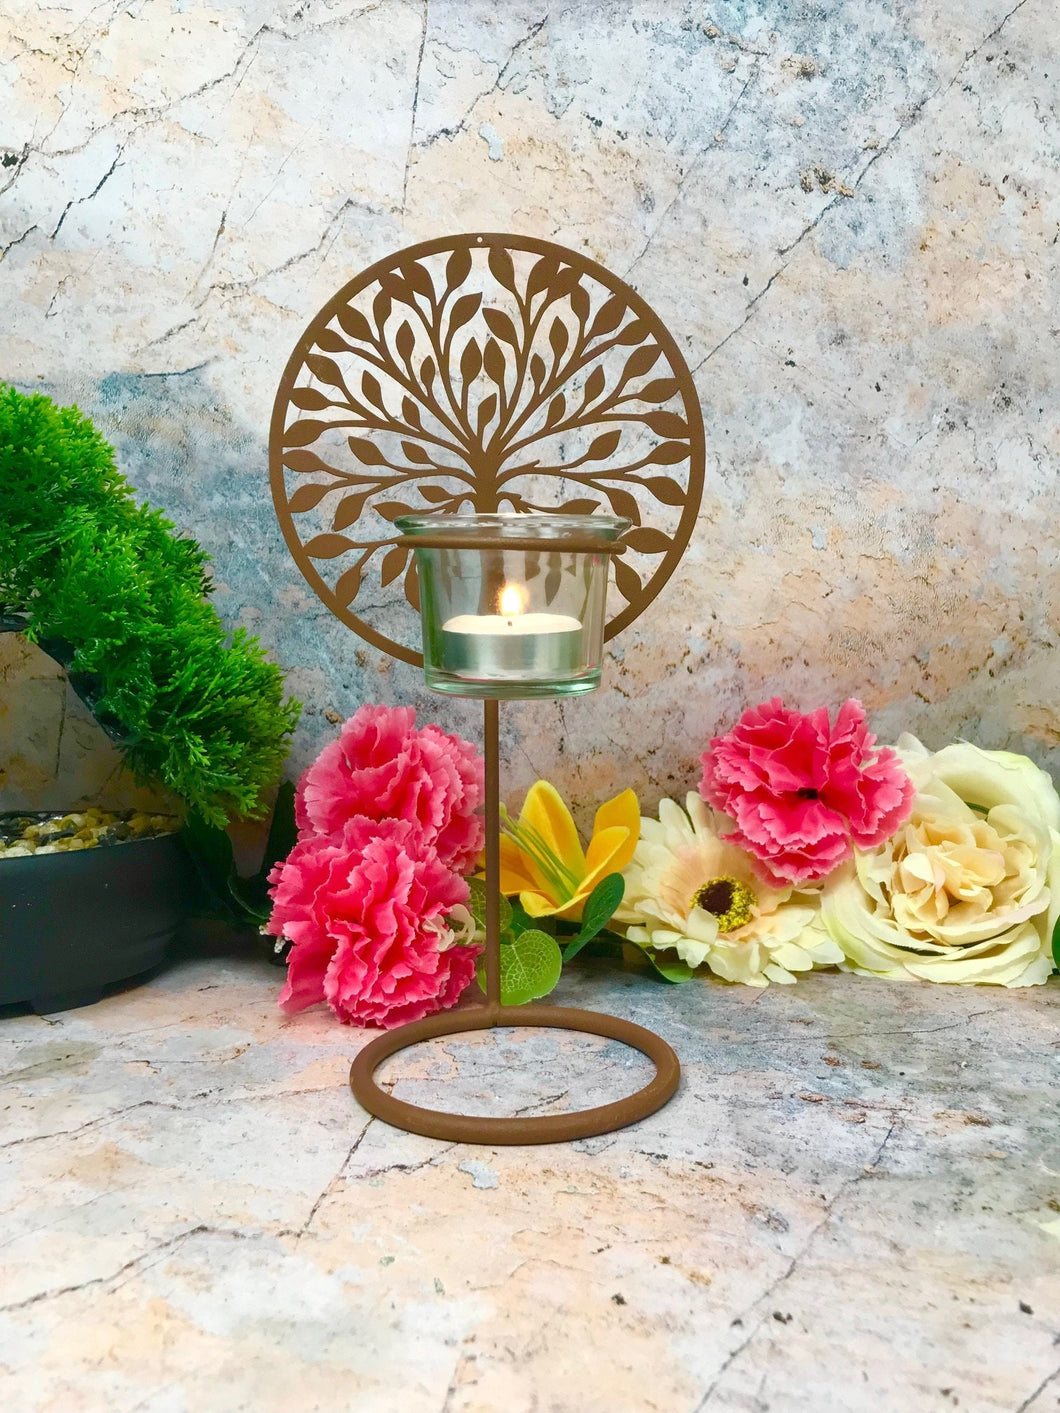 Tree of Life Candle Holder Wiccan Pagan Decor Home Decoration Altar Accessory Ornament